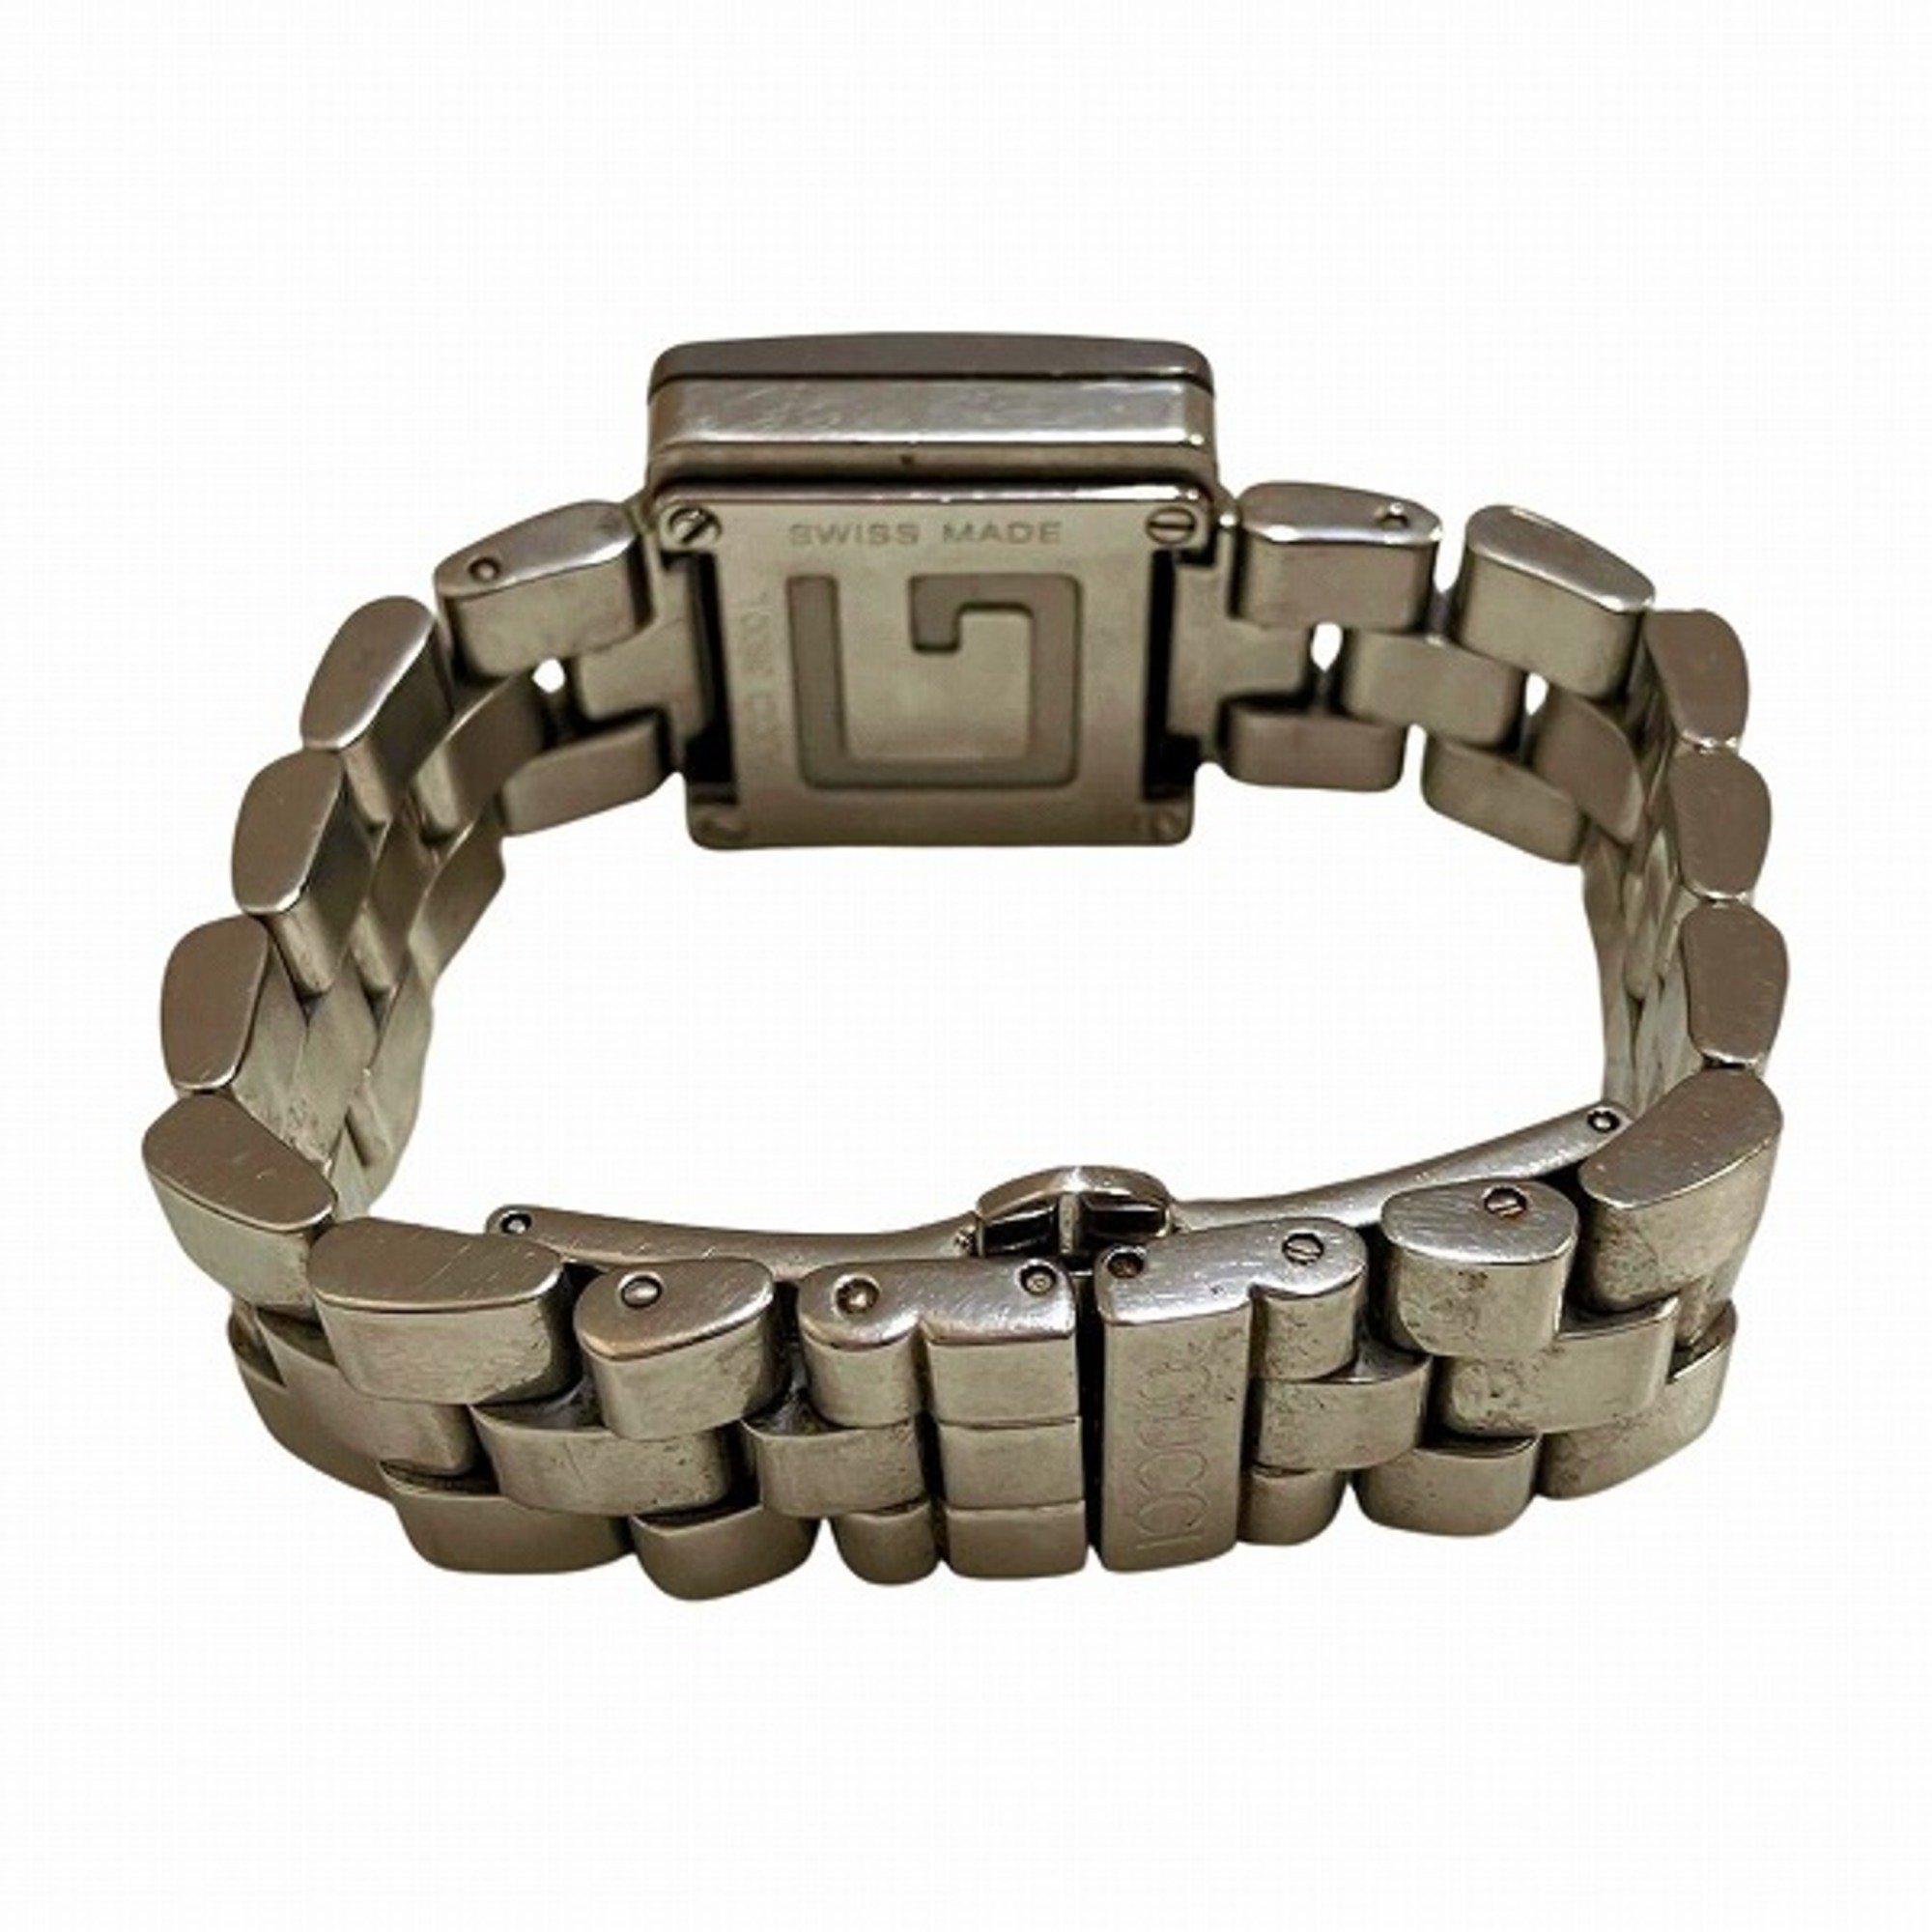 GUCCI 3600L watch ladies' battery replaced